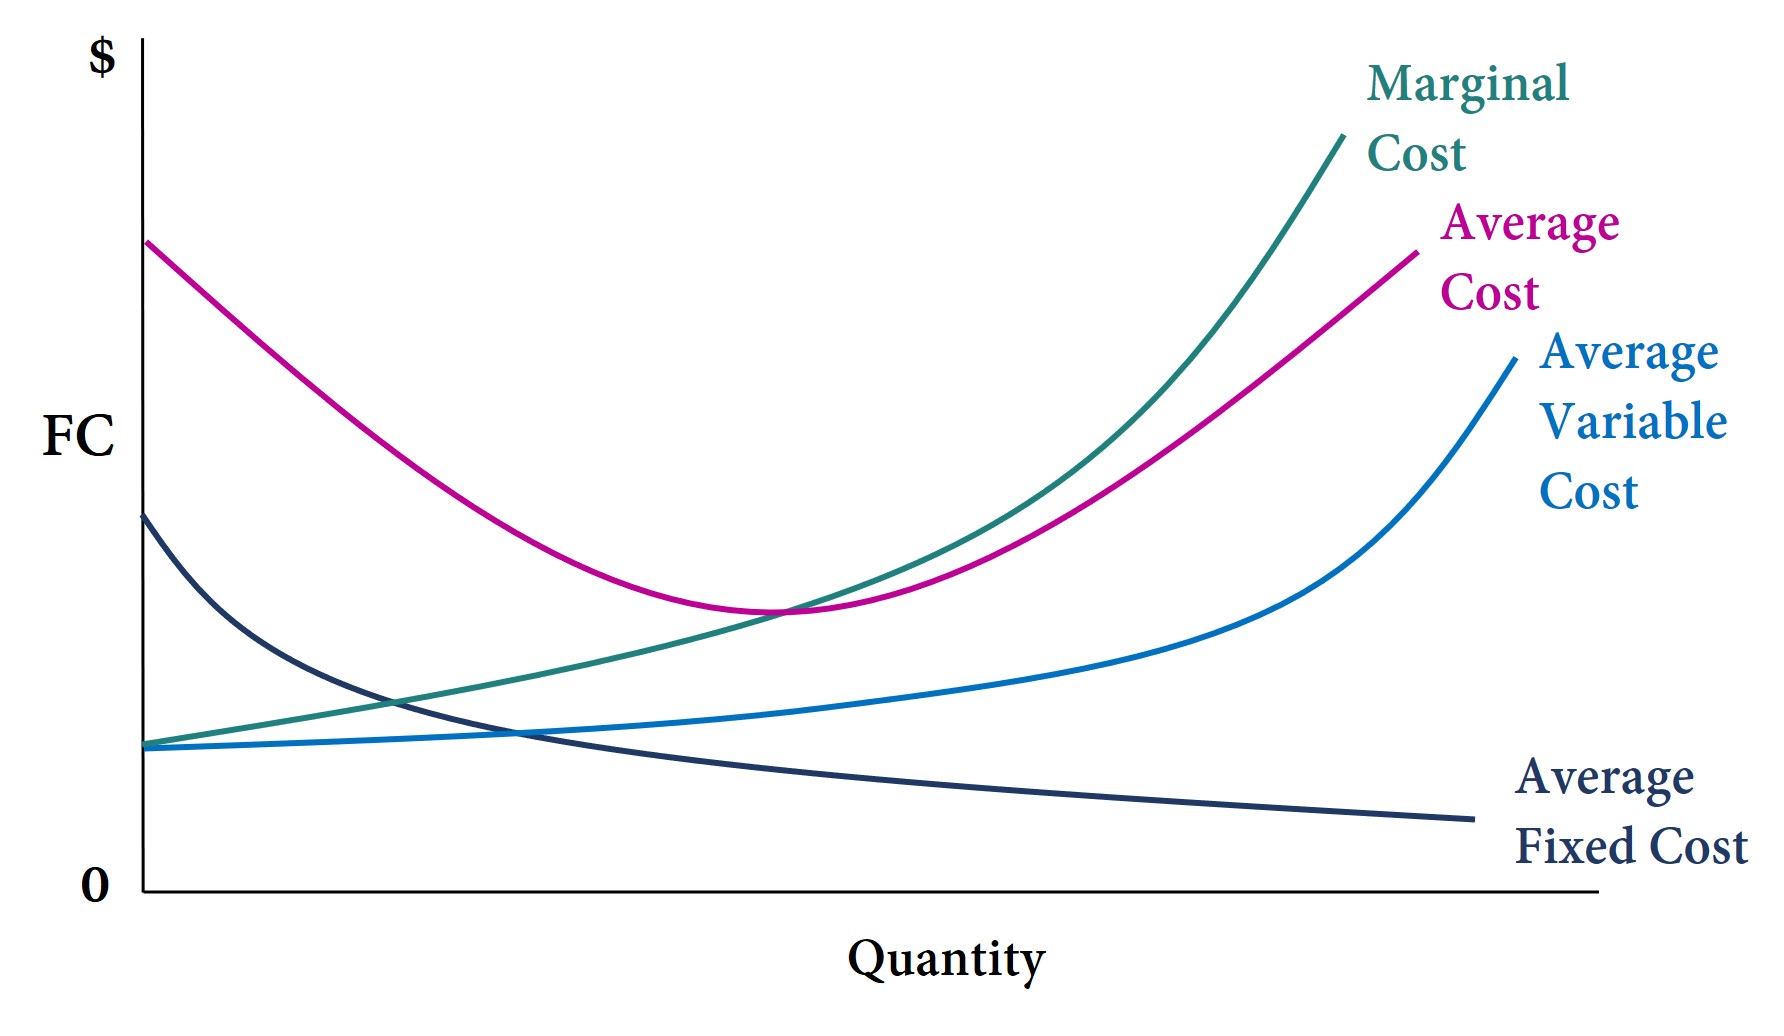 Producer or Firm costs, measured in dollars, are on the vertical axis and quantity of output is on the horizontal axis. Four stylized curves are shown: the average fixed cost curve, which slopes downward; the average variable cost curve, which starts out below the average fixed cost curve and slopes upward; the marginal cost curve, which starts at the same point as the average variable cost curve but has a higher upward slope; and the average cost curve, which has the highest vertical intercept, slopes down until it hits the marginal cost curve, then slopes upward while remaining below the marginal cost curve. All the curves are smooth.